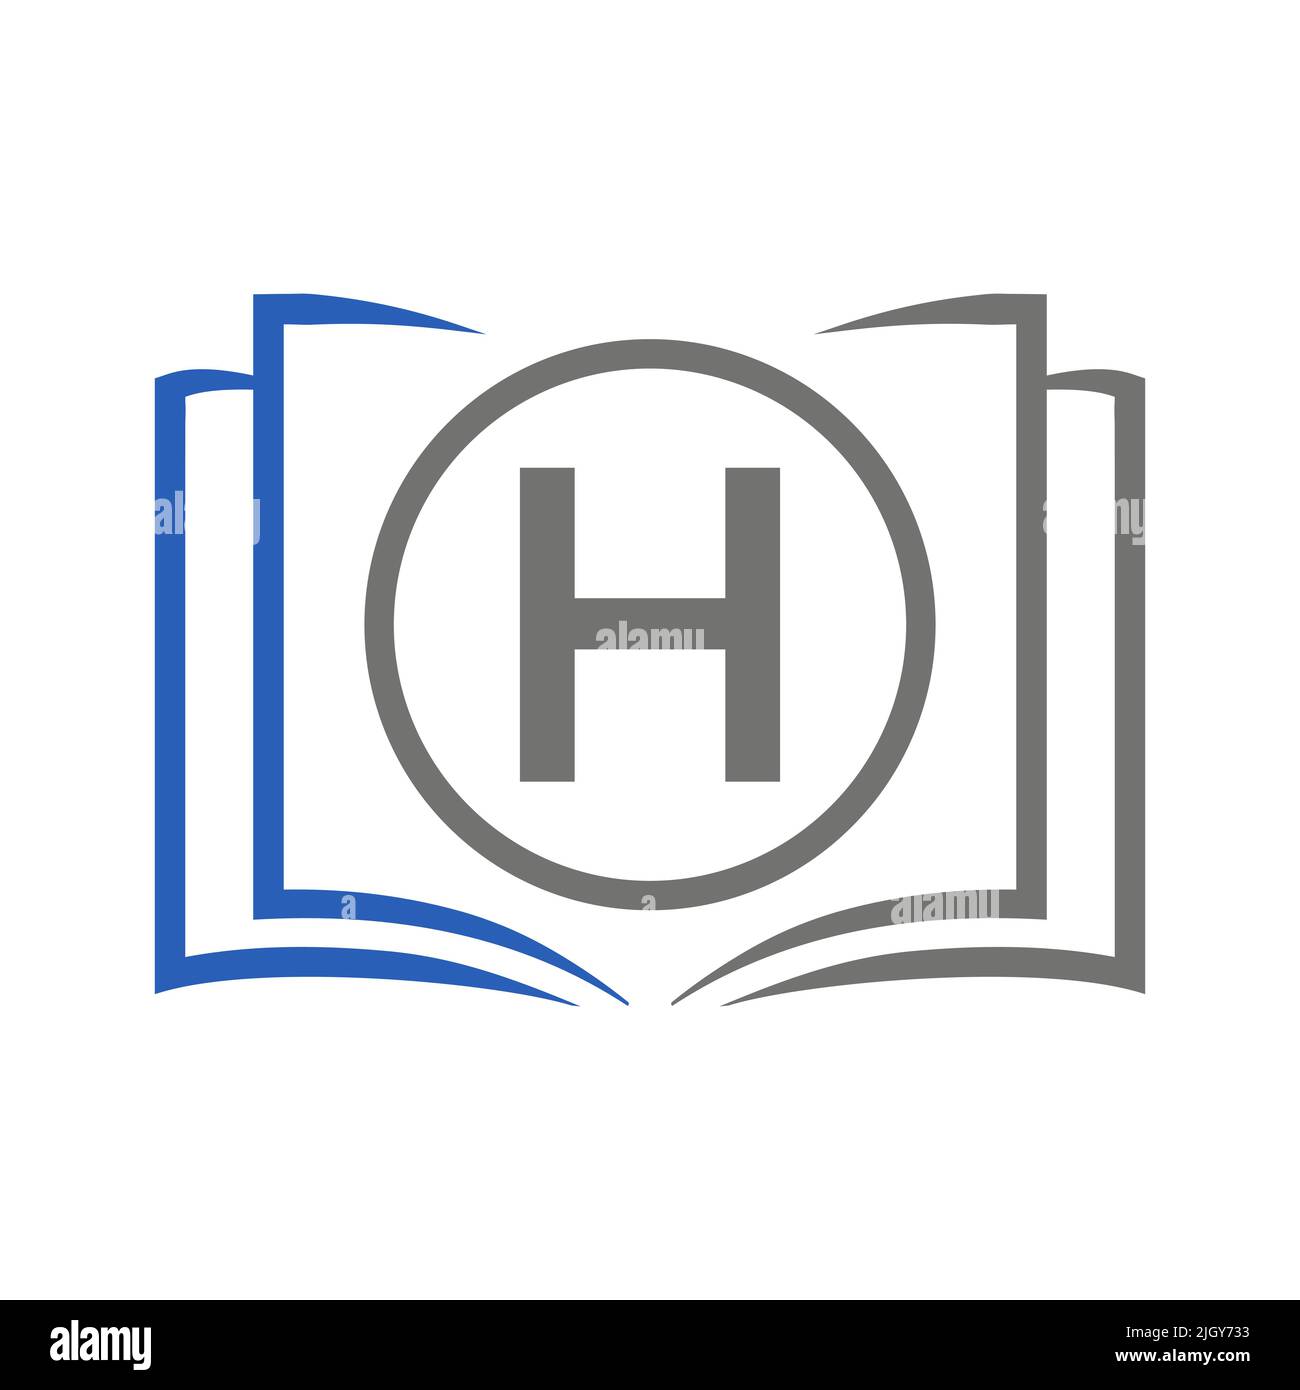 Education Logo On Letter H Template. Open Book Logo On H Letter, Initial Educational Sign Concept Template Stock Vector